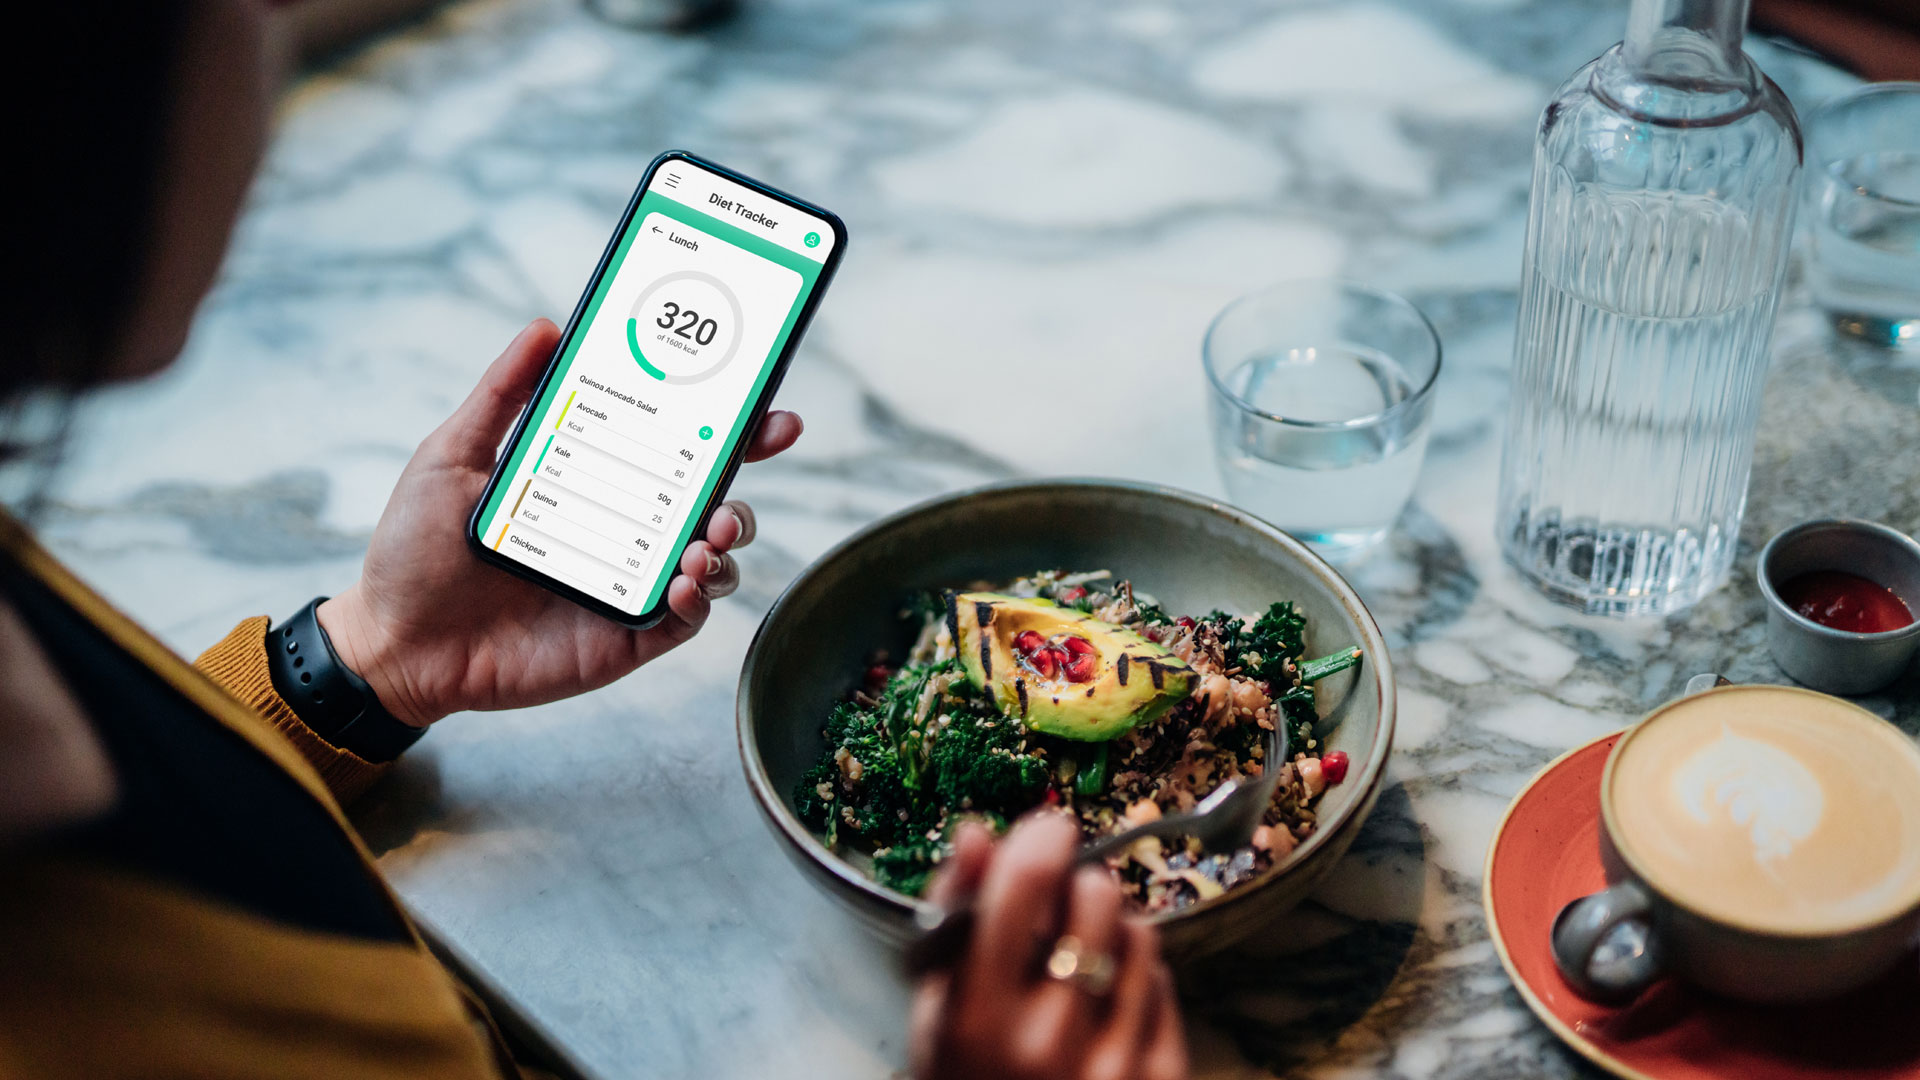 Image shows a food and calorie tracking app on the phone